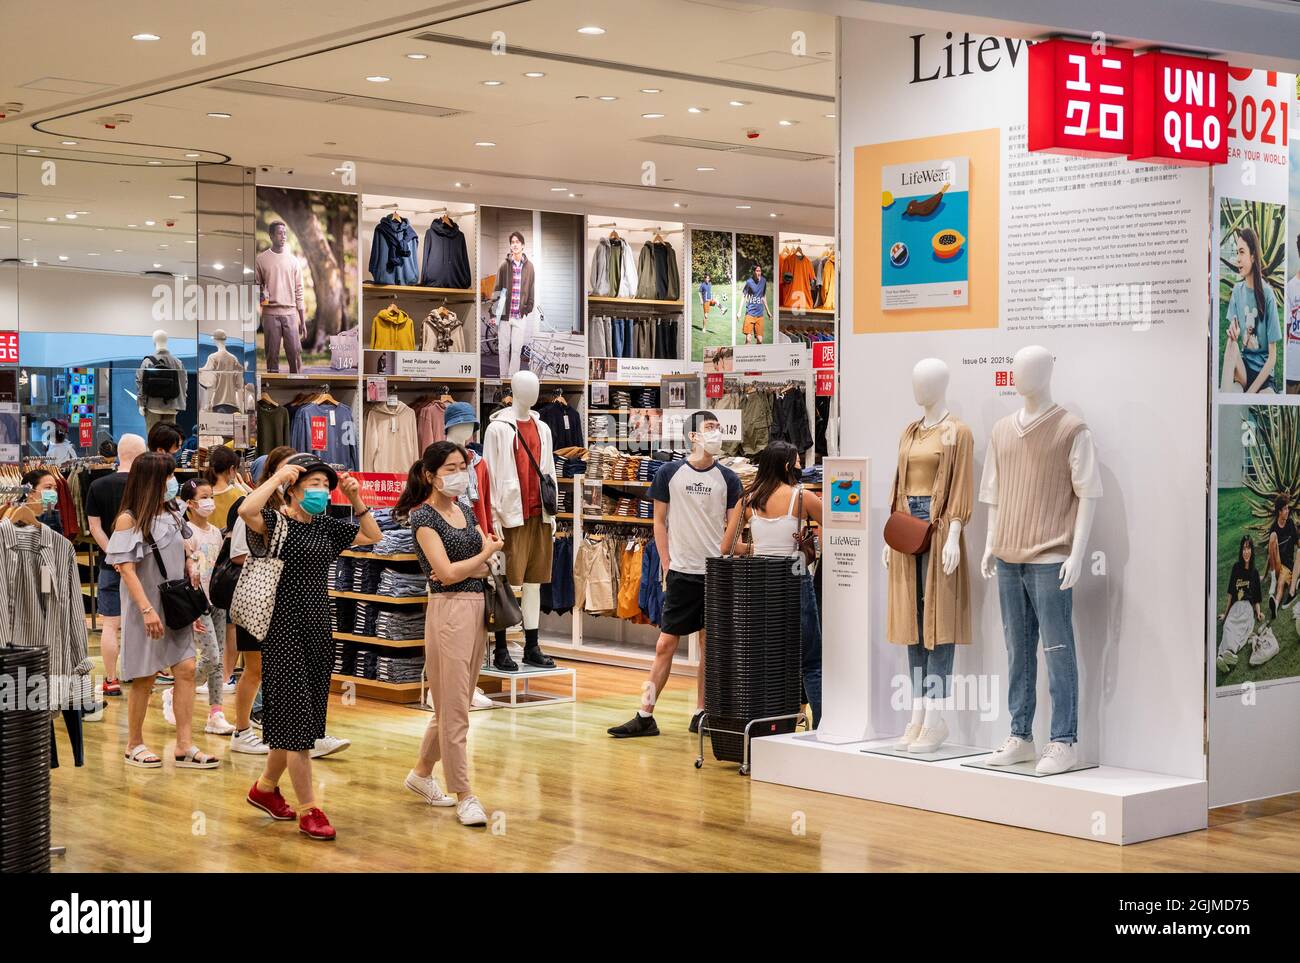 Page 2 - Uniqlo Store China High Resolution Stock Photography and Images -  Alamy